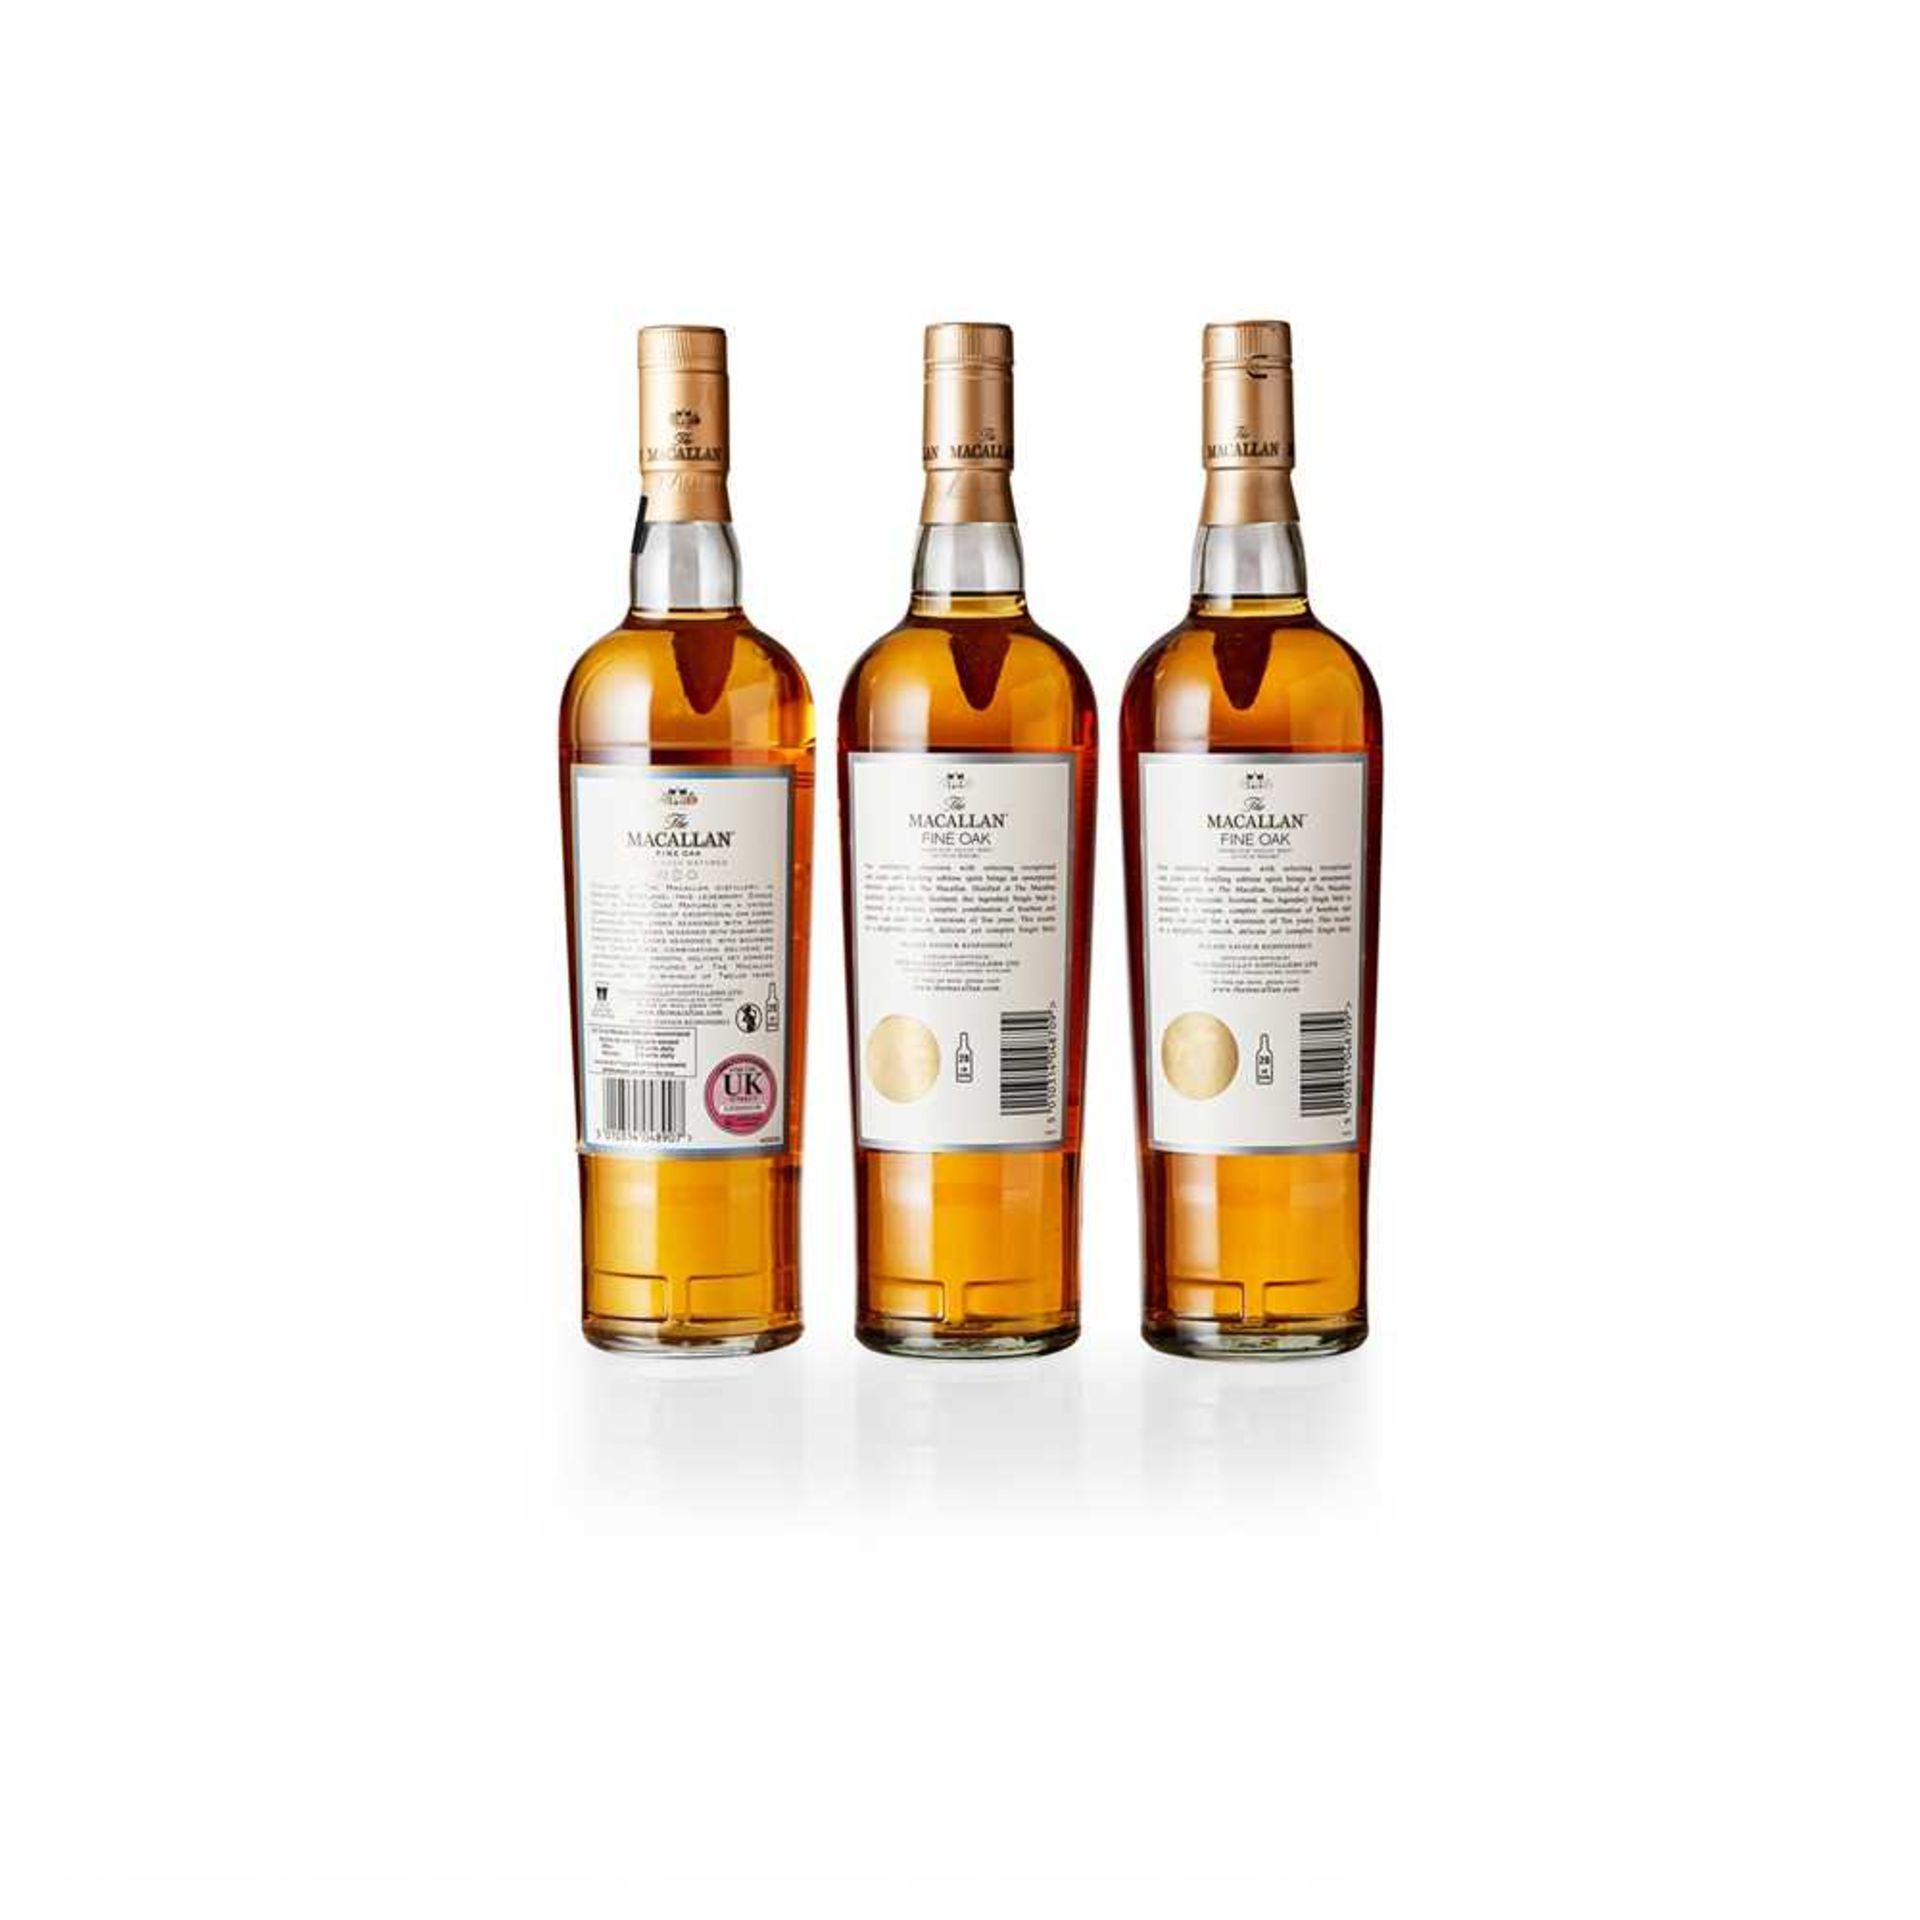 THE MACALLAN 12 YEAR OLD FINE OAK - Image 2 of 2